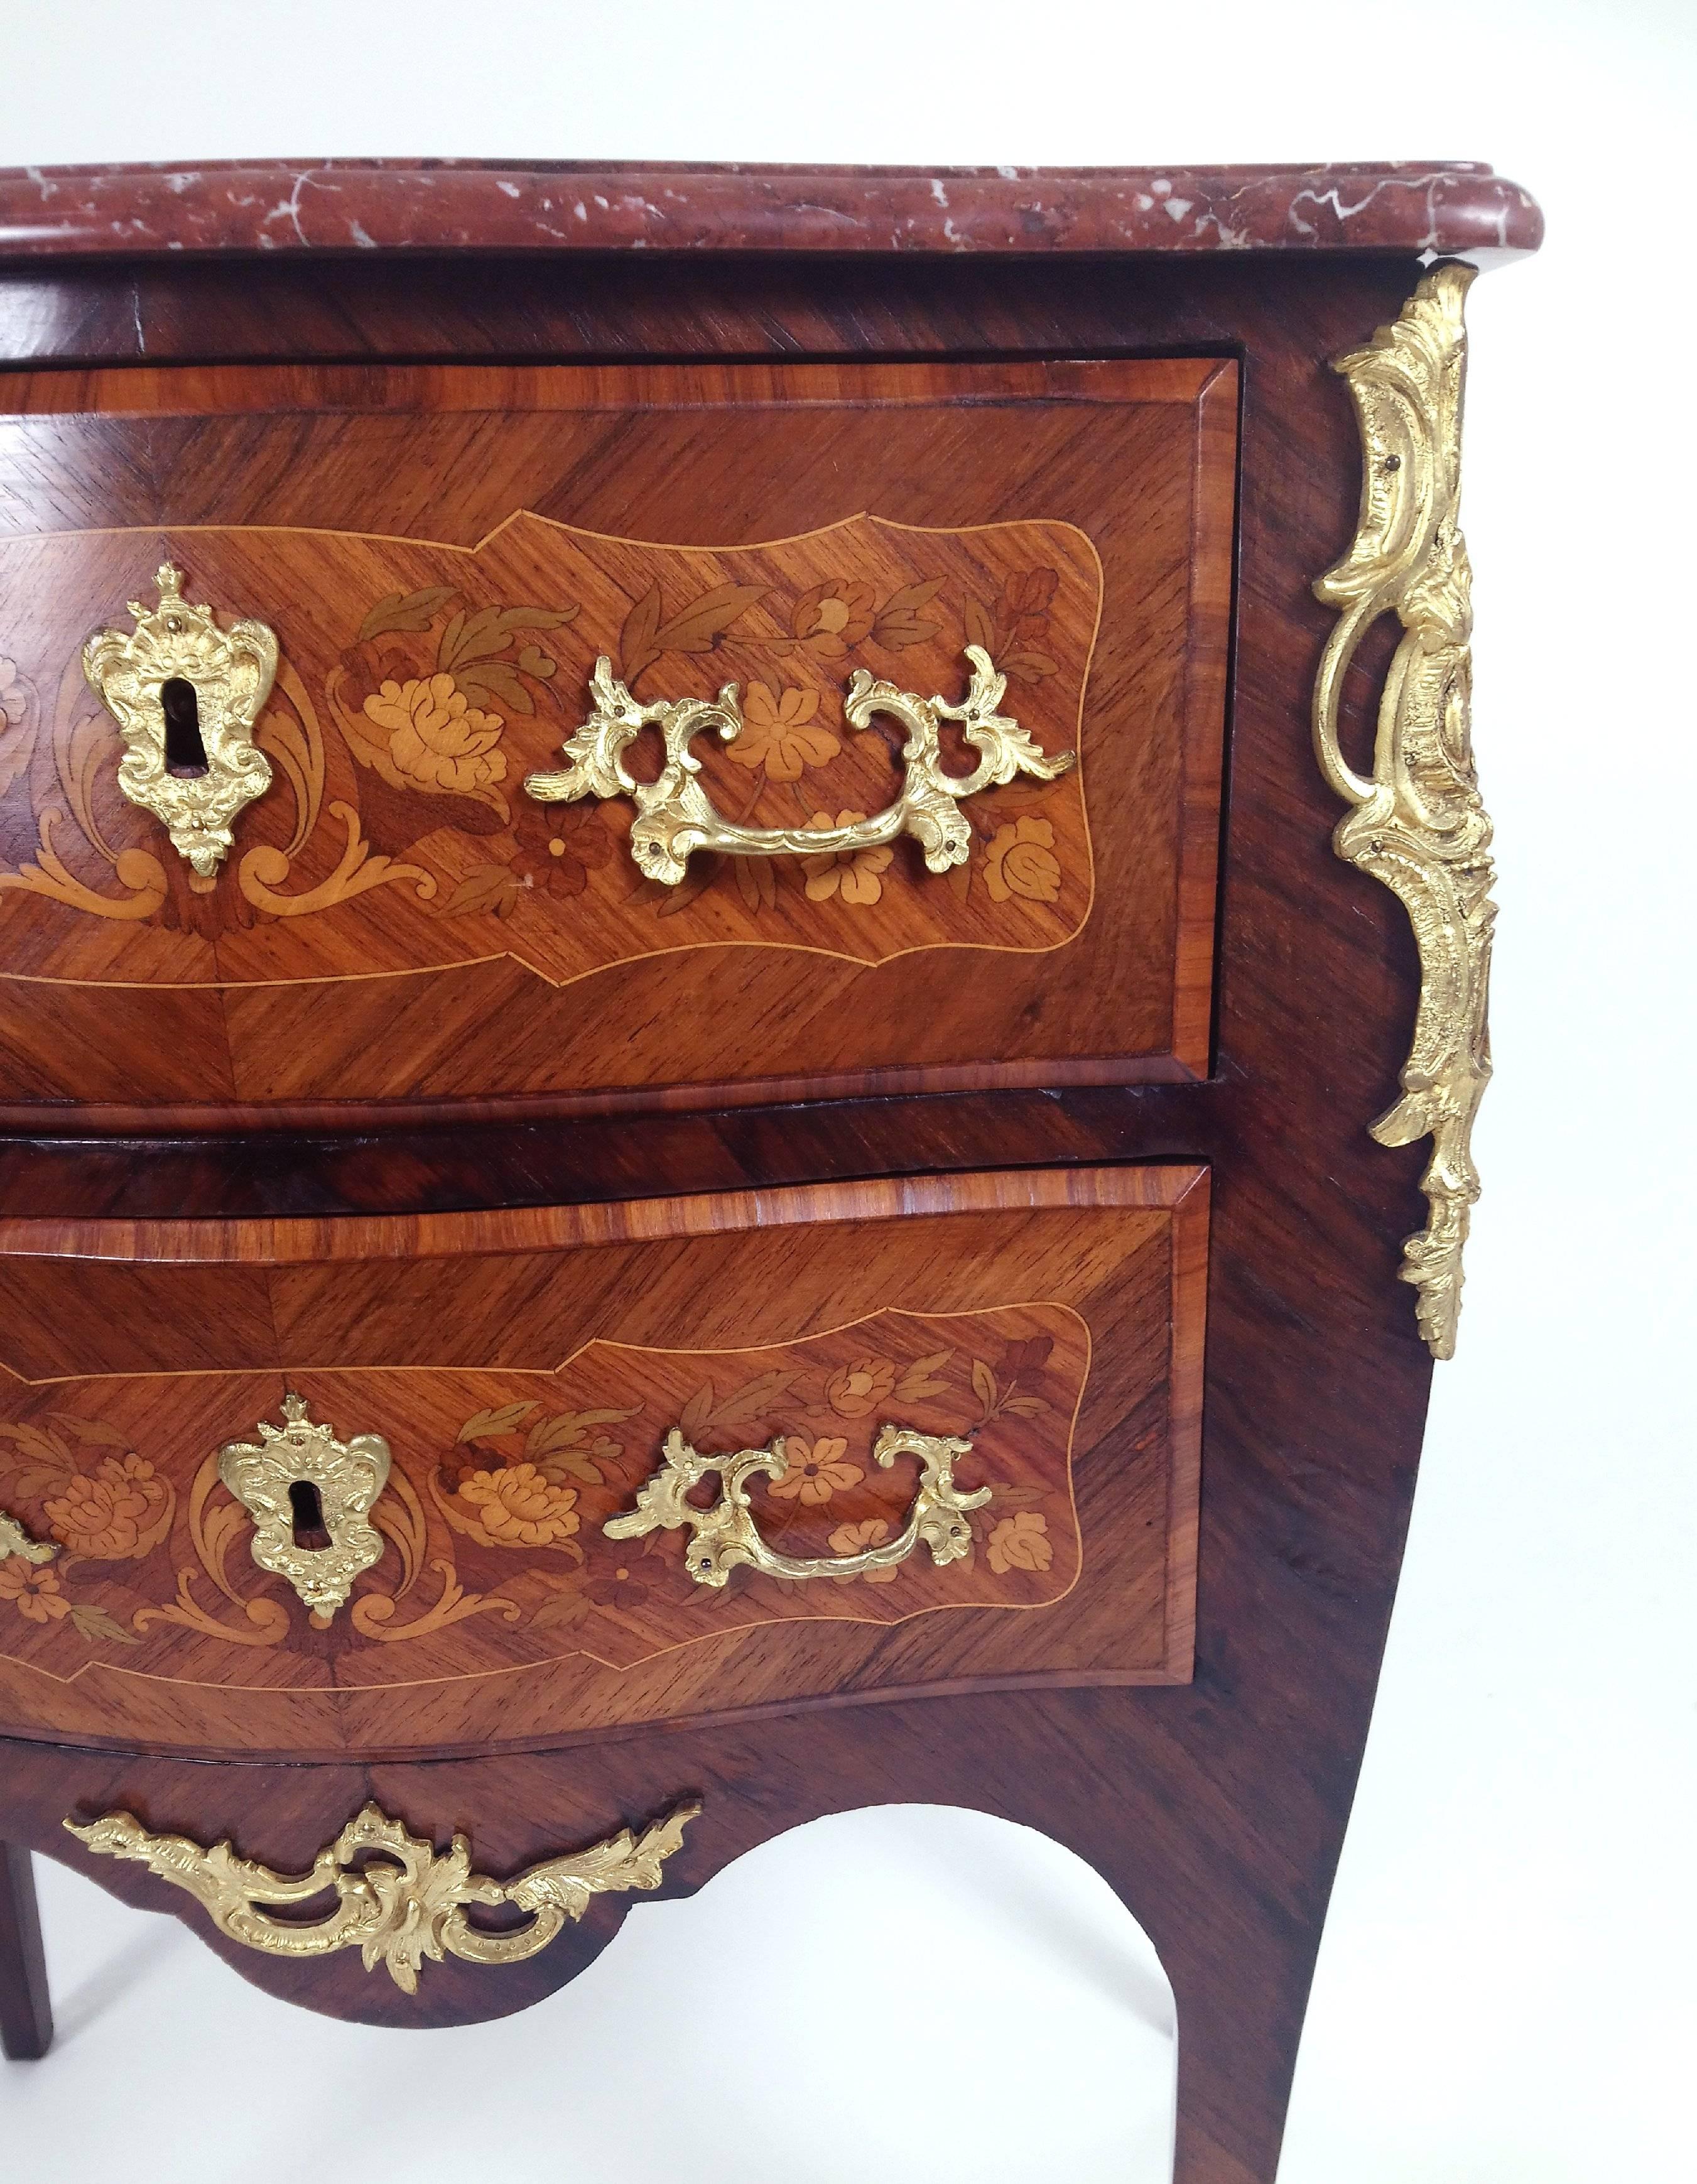 This beautiful and more sought-after size French bombe shaped commode features delicately detailed marquetry inlay work of scrolls and floral designs. The chest also has superb ormolu mounts, decorative vine shaped pull handles and ornate